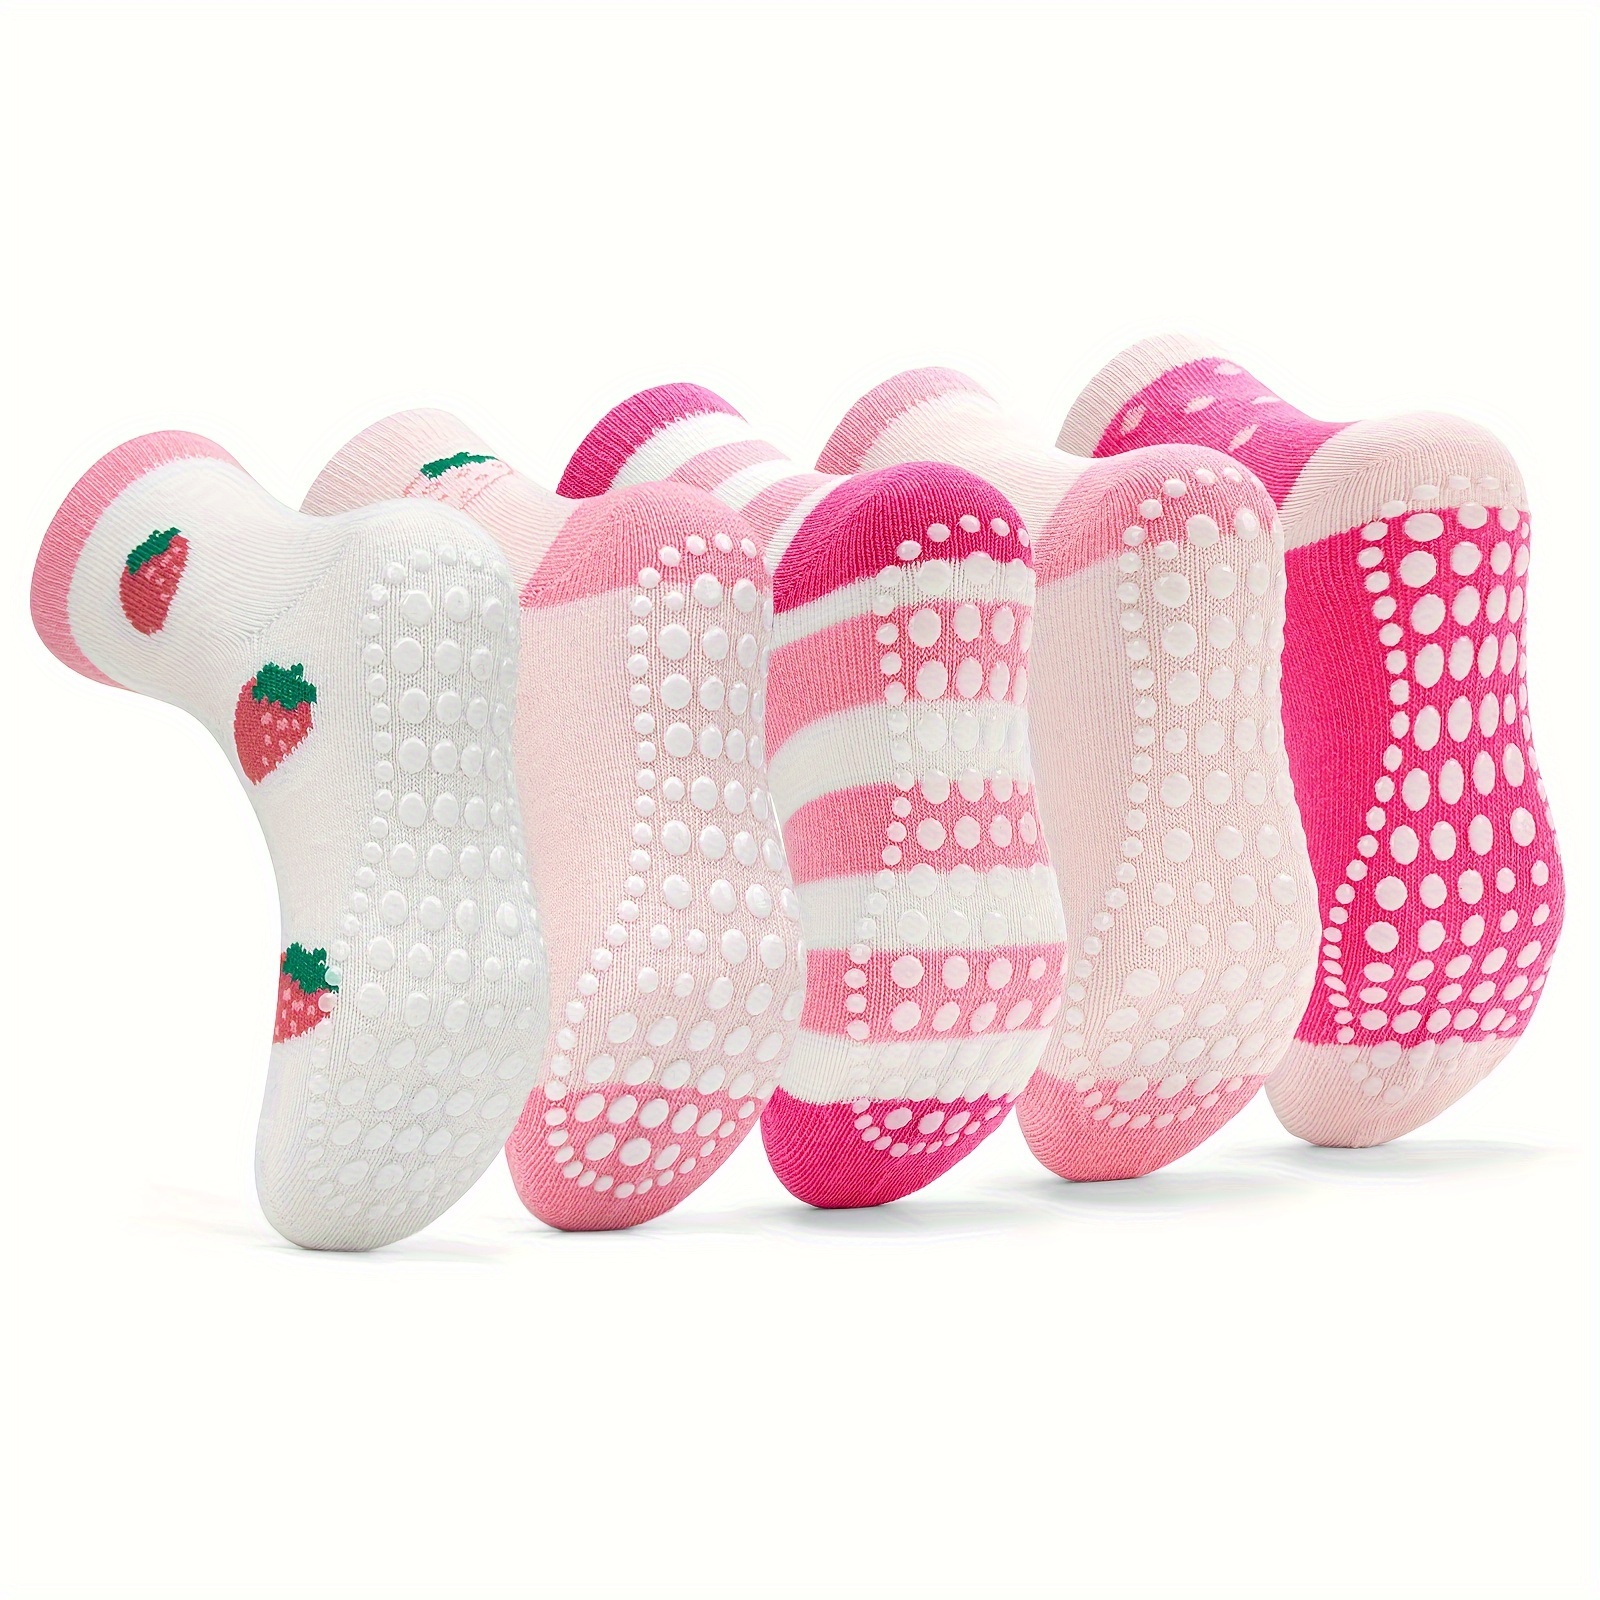 

5 Pairs Of Girl's Non-slip Socks, Cute Strawberry Striped Pattern, Bottom Rubber Dot Cotton Blend Comfy Breathable Soft Socks For Kids Wearing